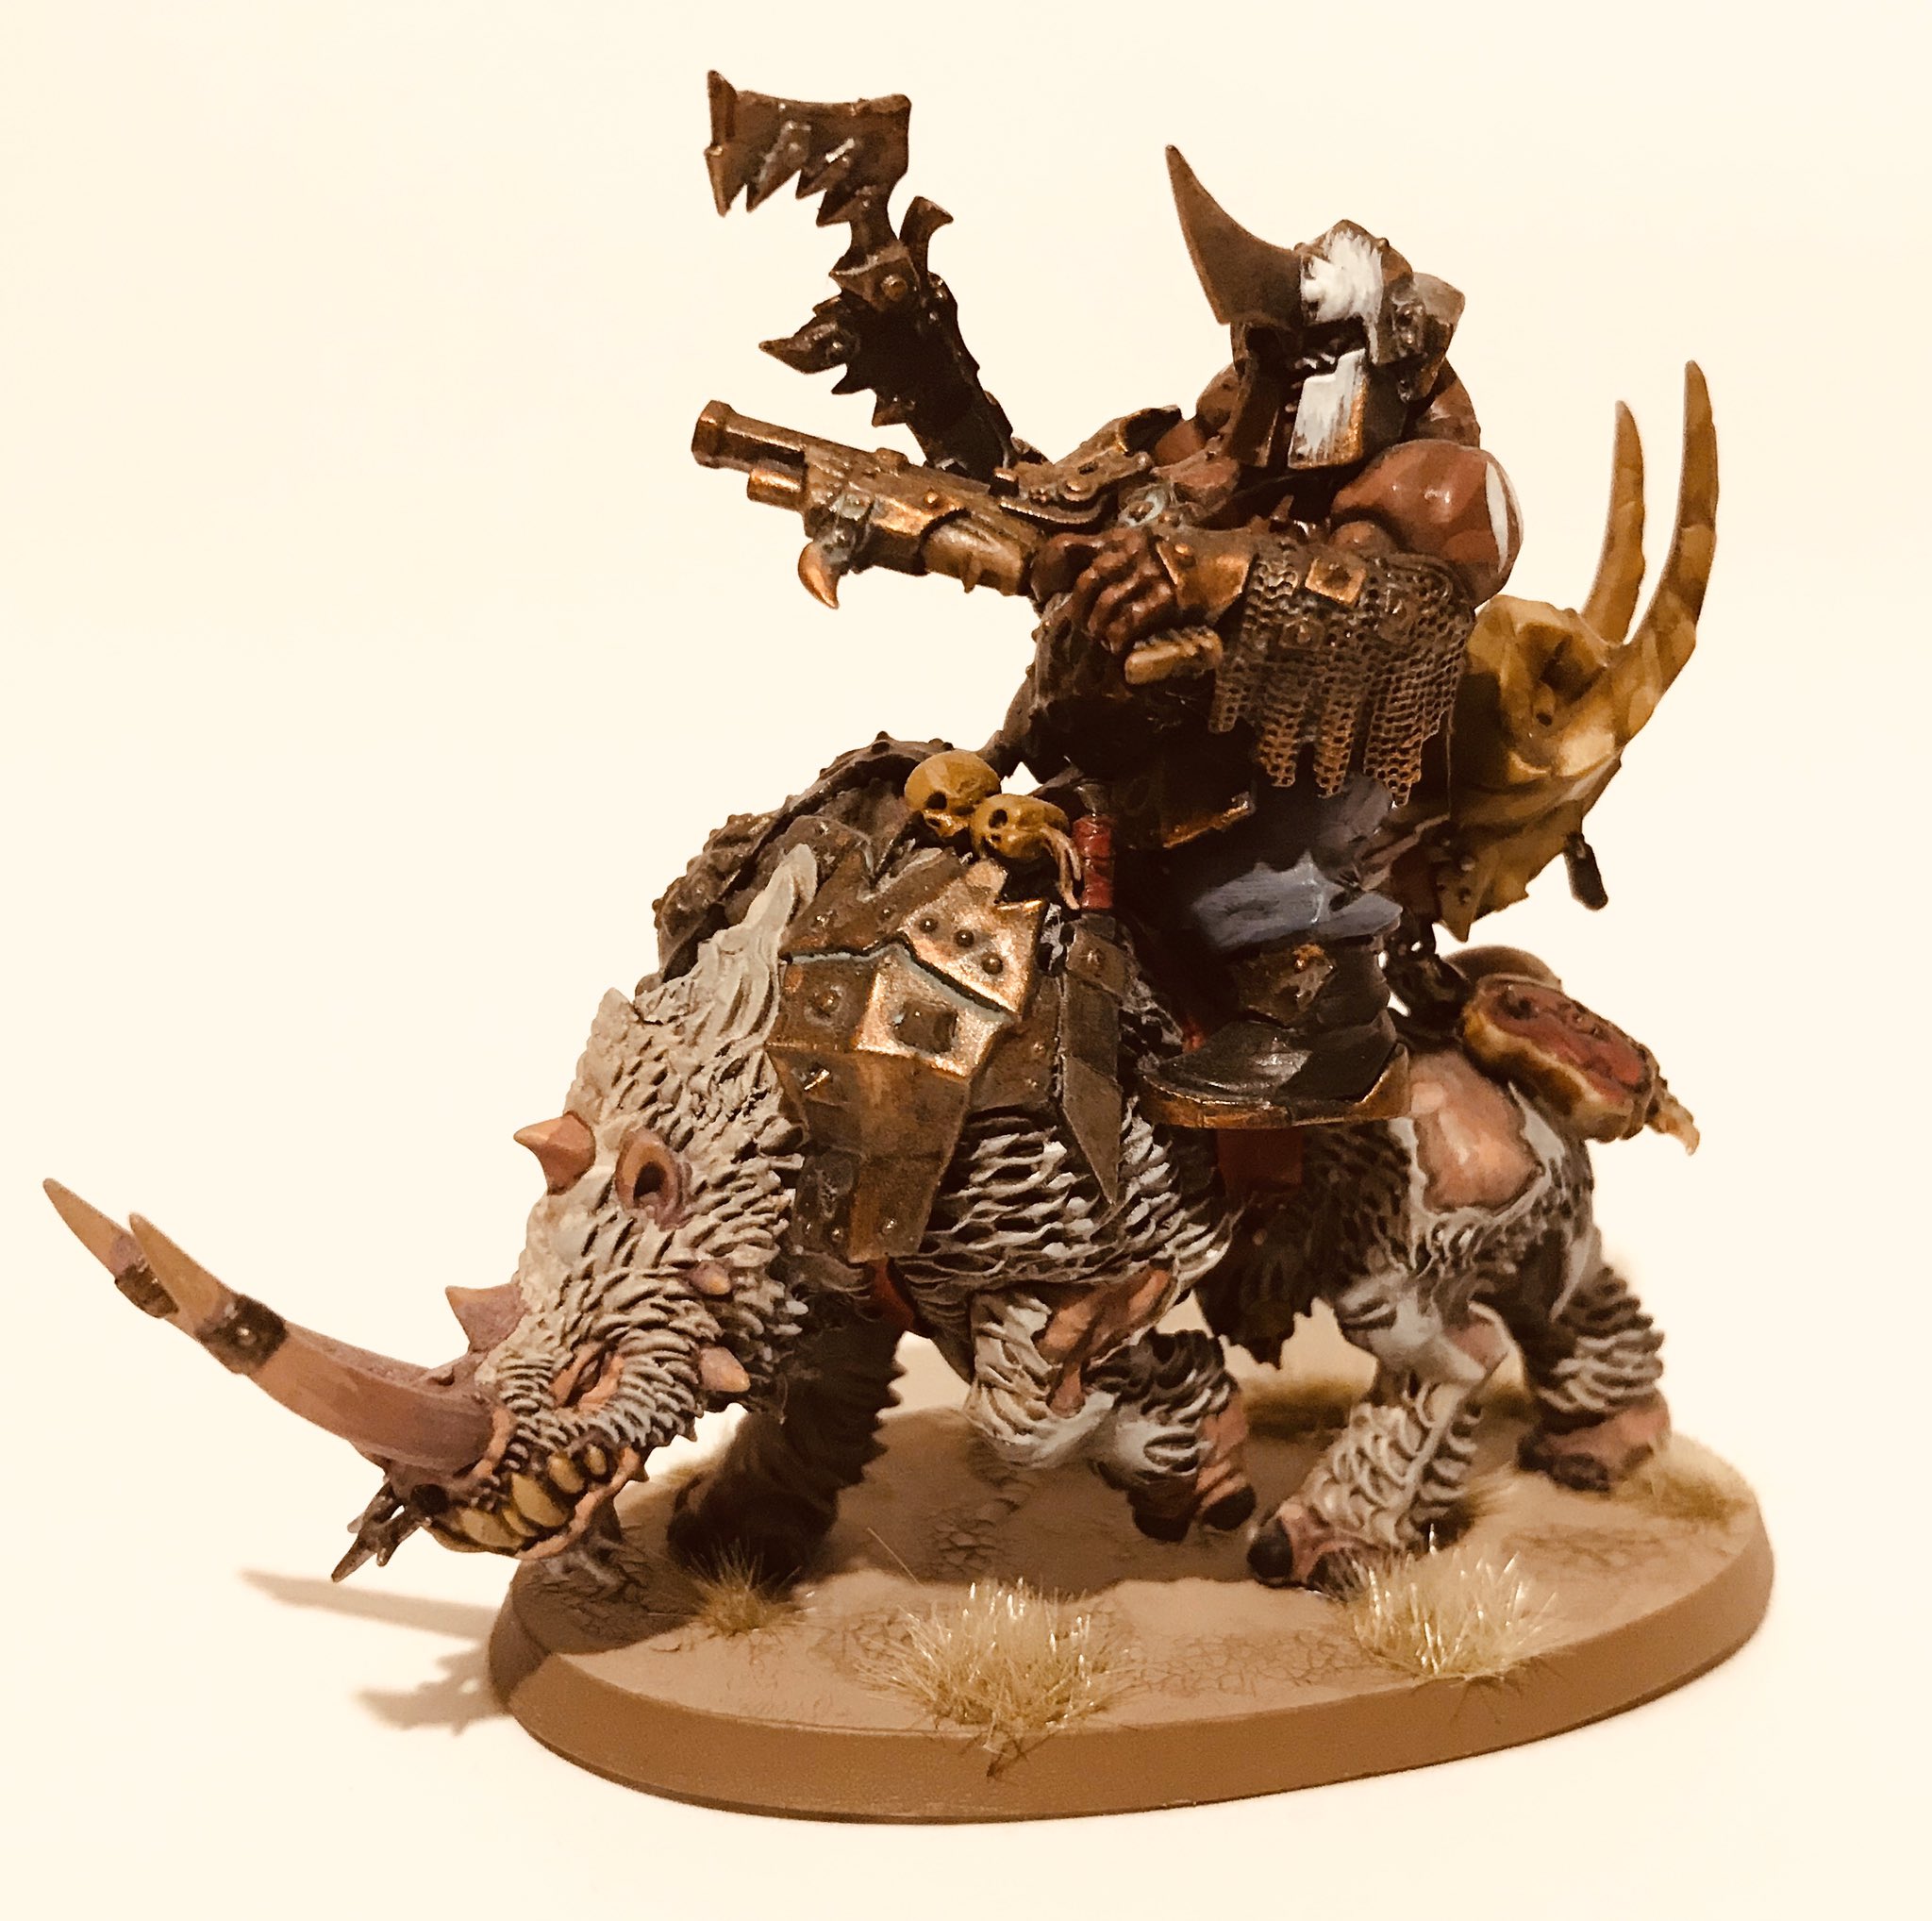 Phil Kelly on Twitter: "All my Ogor Mournfang riders get three  modifications: 1) extra metal plates/stowage 2) a lowered saddle 3) a rhinox  head for the hairy beastie. Luckily you get bitz